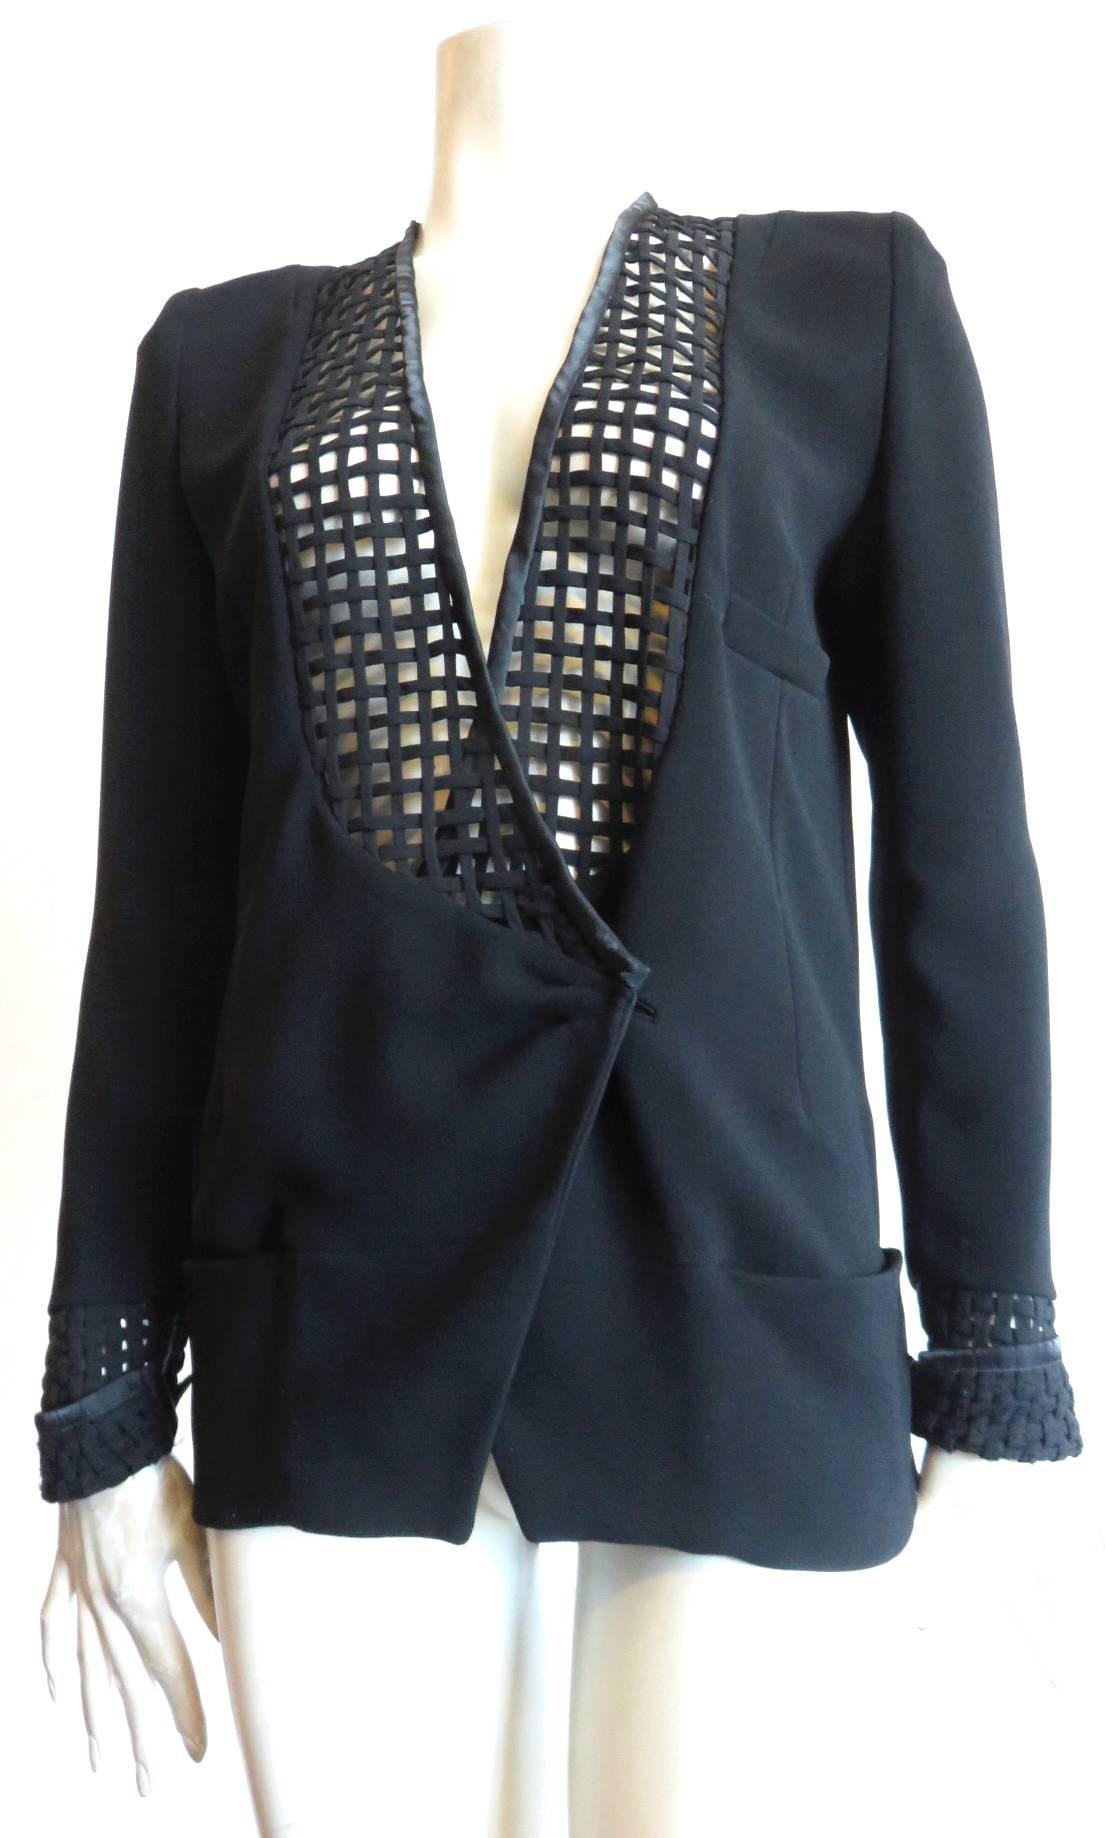 Excellent condition, BALENCIAGA PARIS by Nicolas Ghesquière, Black,  silk lattice detail jacket.

Sheer, lattice detail front, and cuff detailing.  

Solid, black, crepe main body fabrication with cross-over front closure.

Draped, solid,